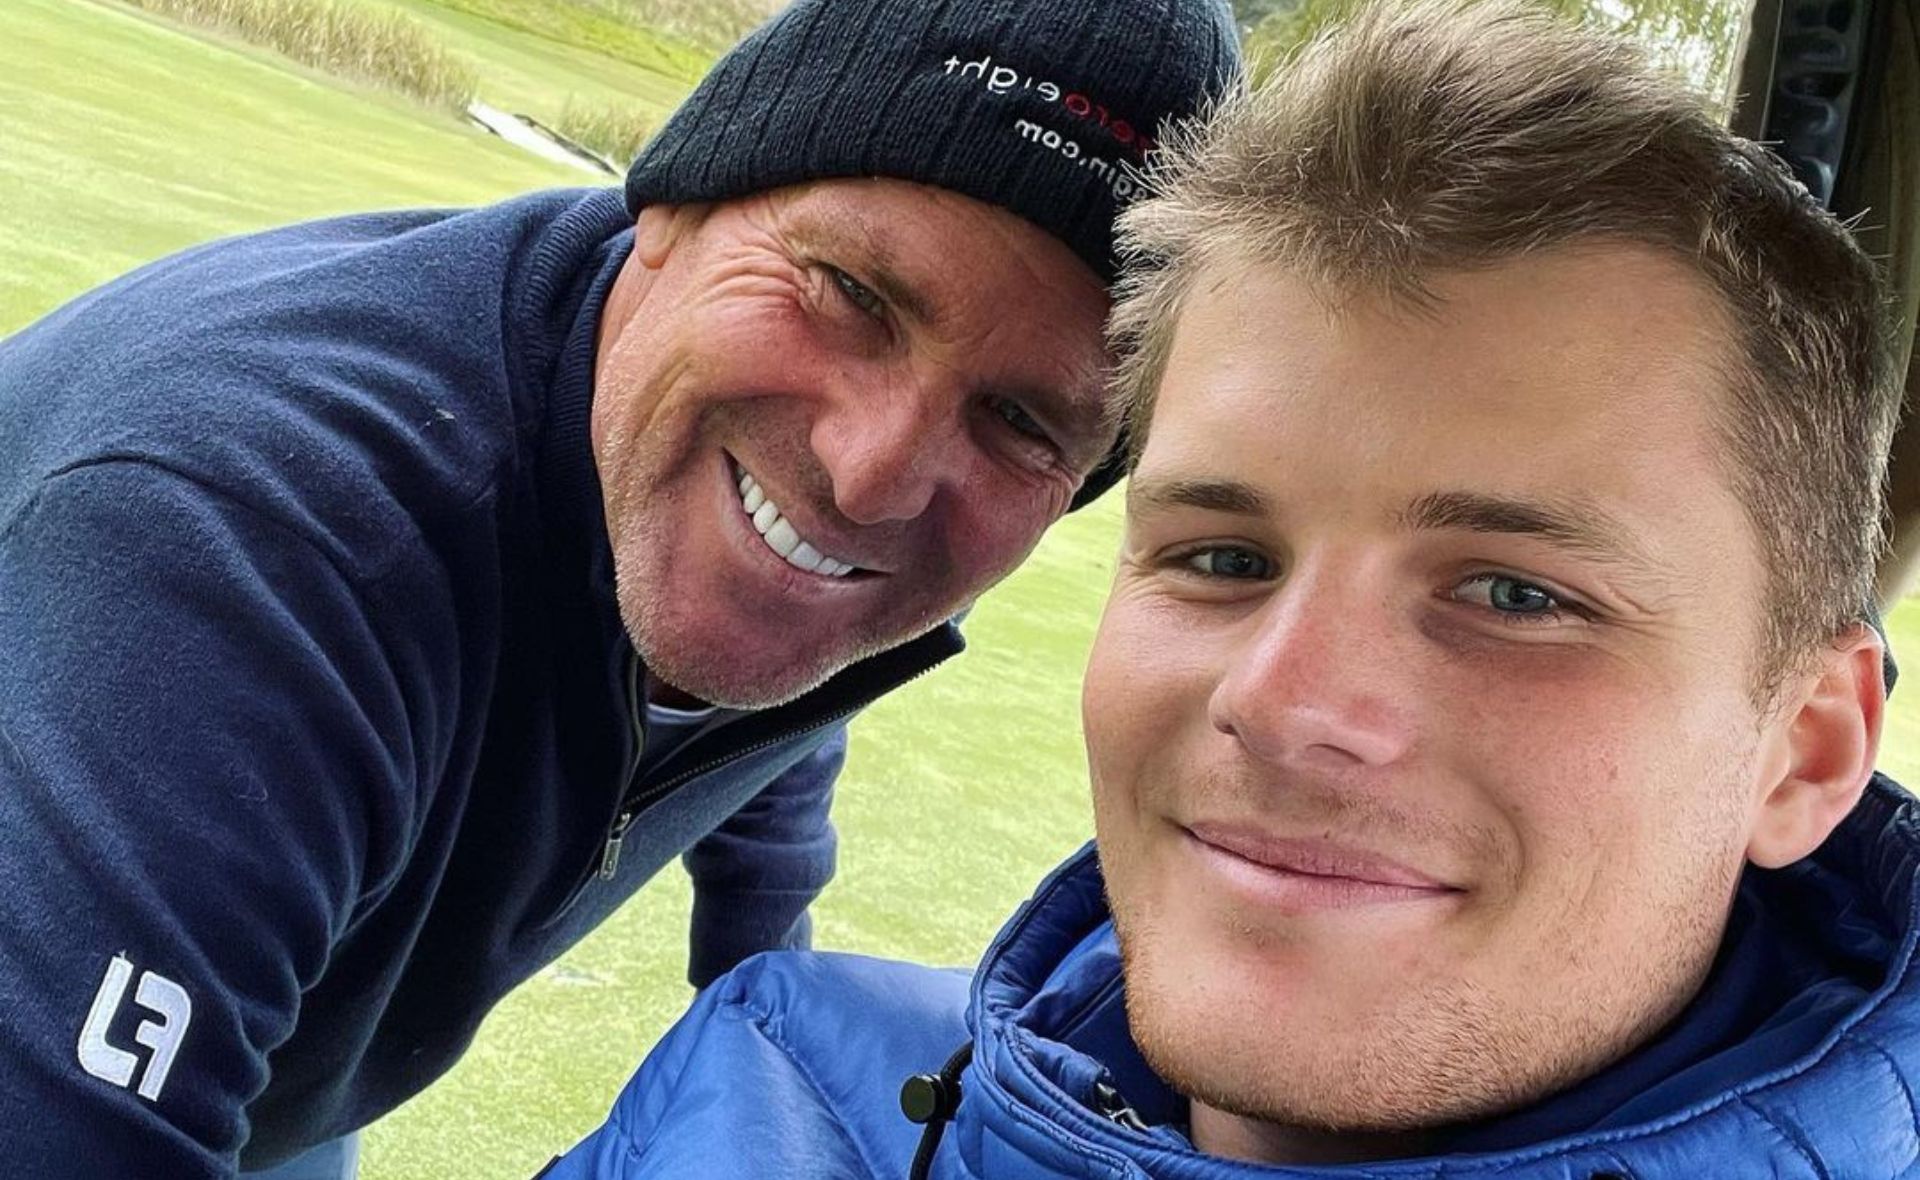 “I used this trauma”: Shane Warne’s son Jackson confesses how he coped with grief after dad’s death